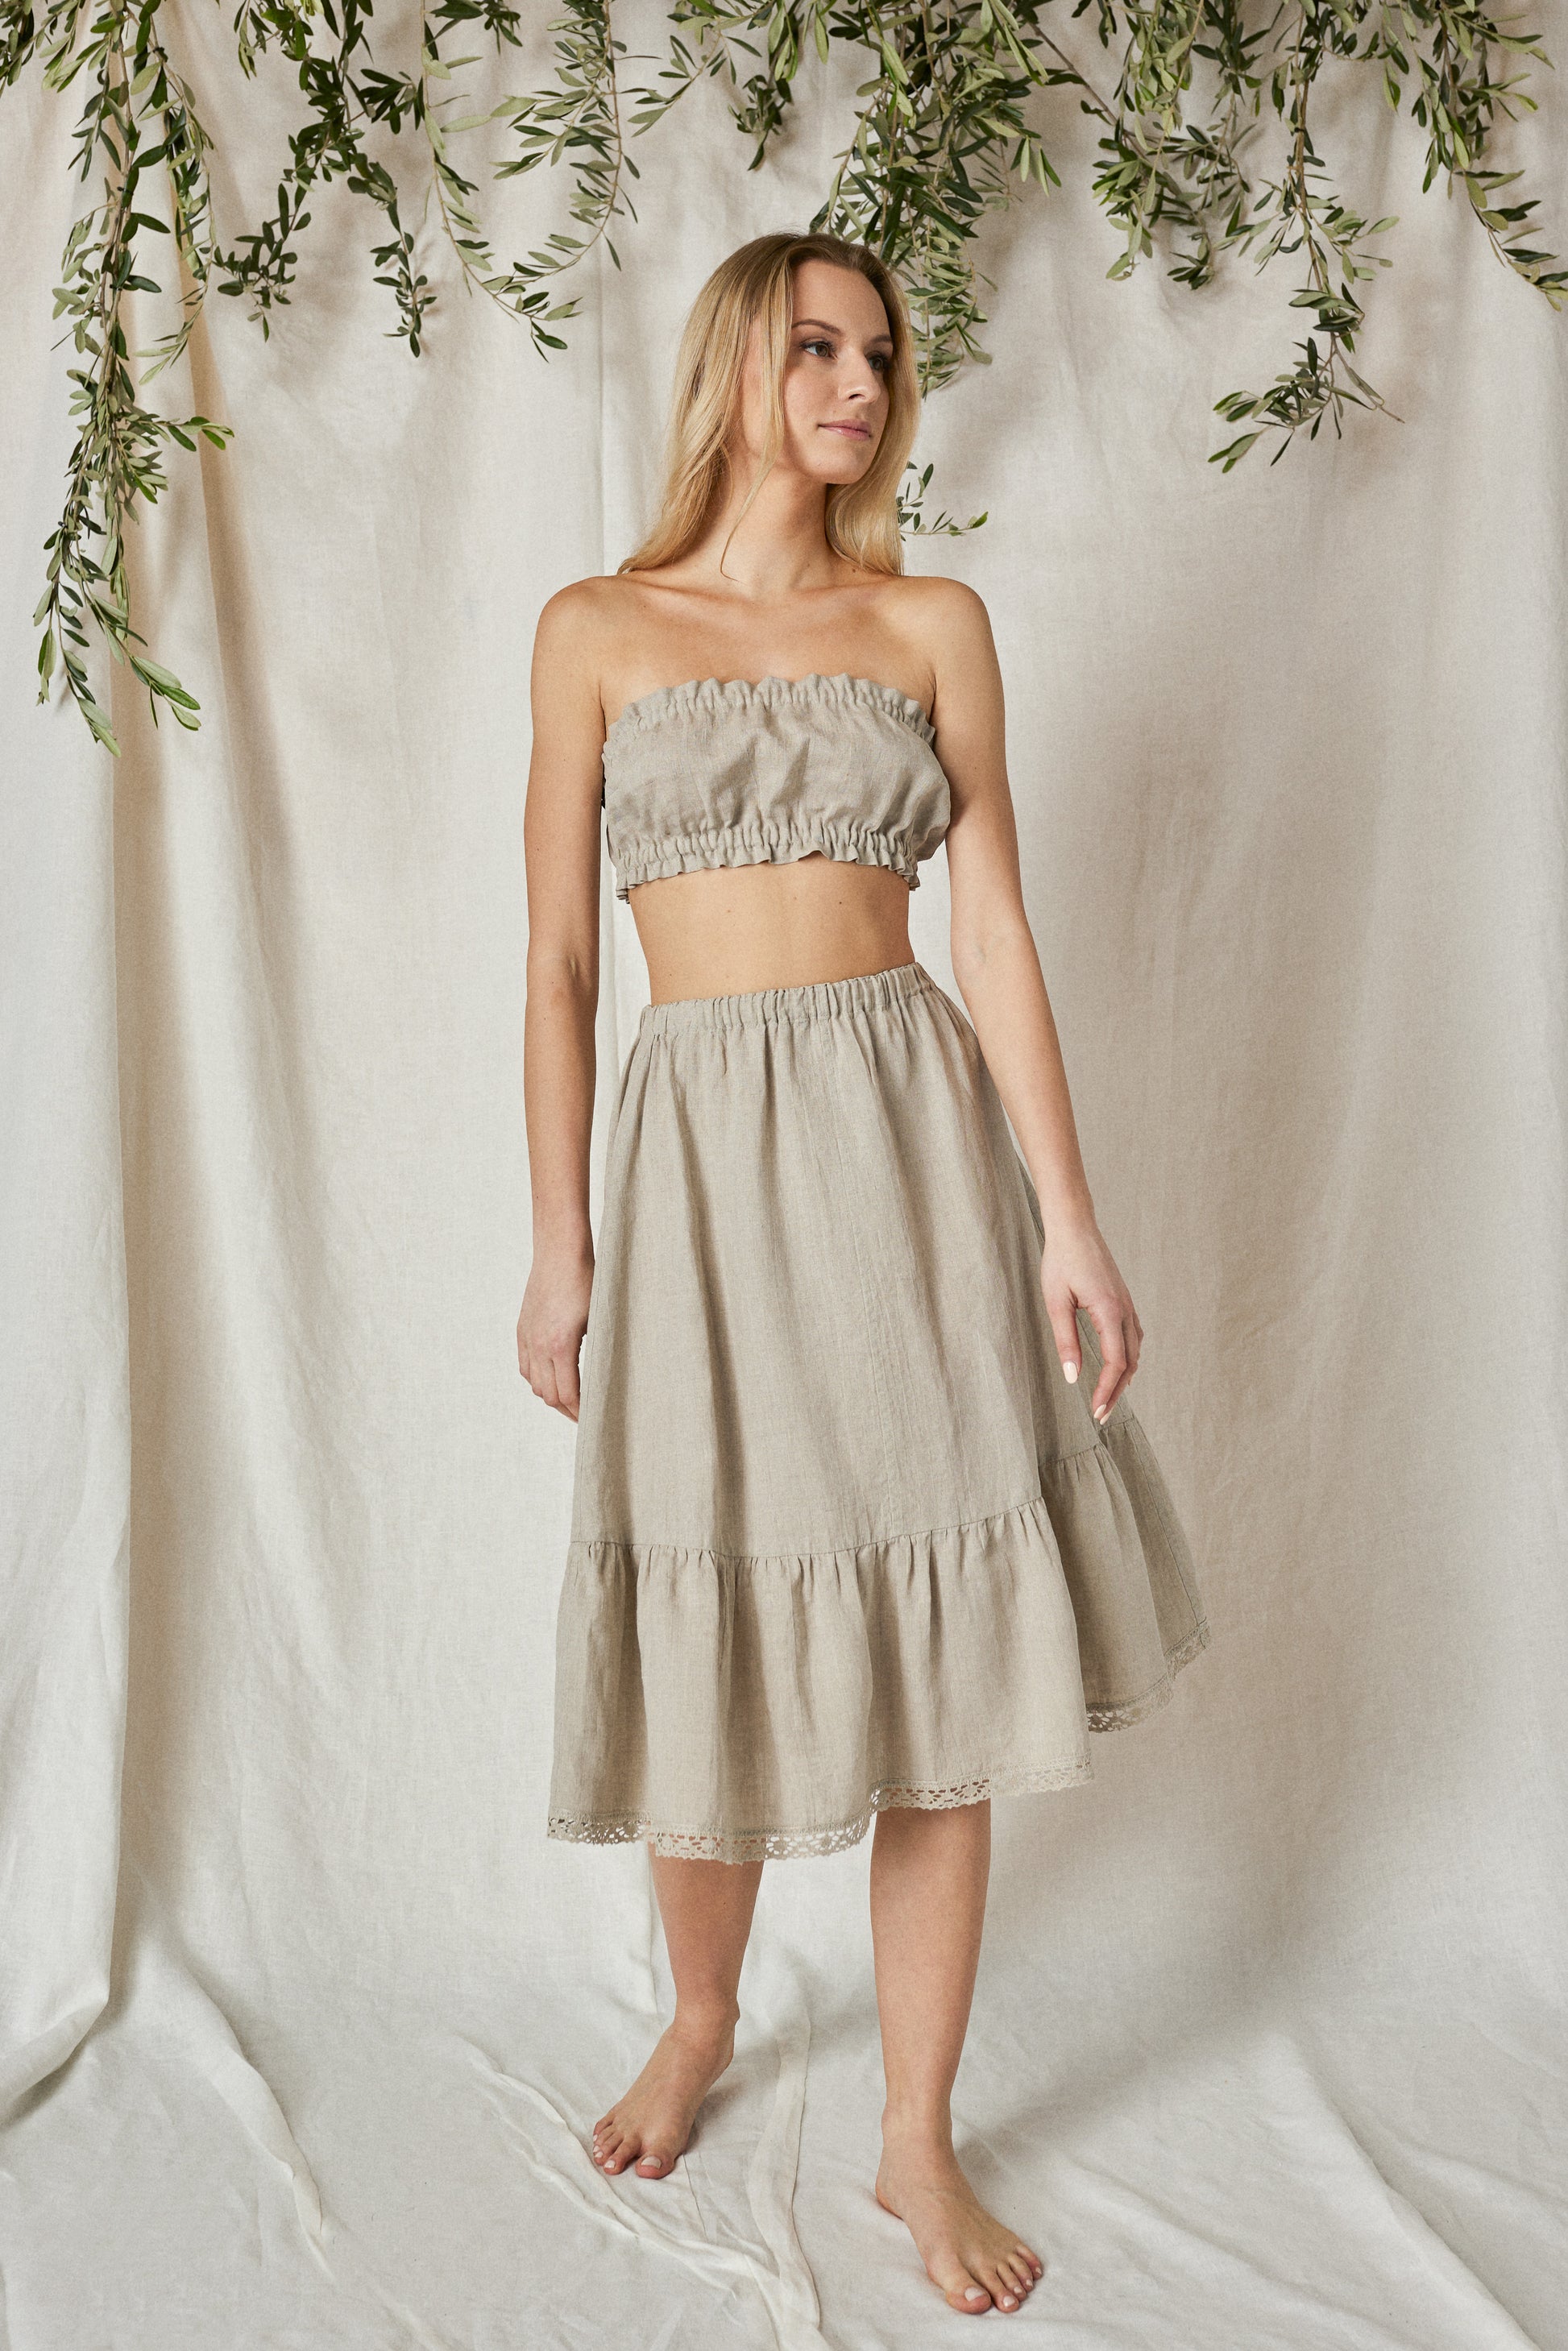 Linen Underskirt with Ruffle and Lace